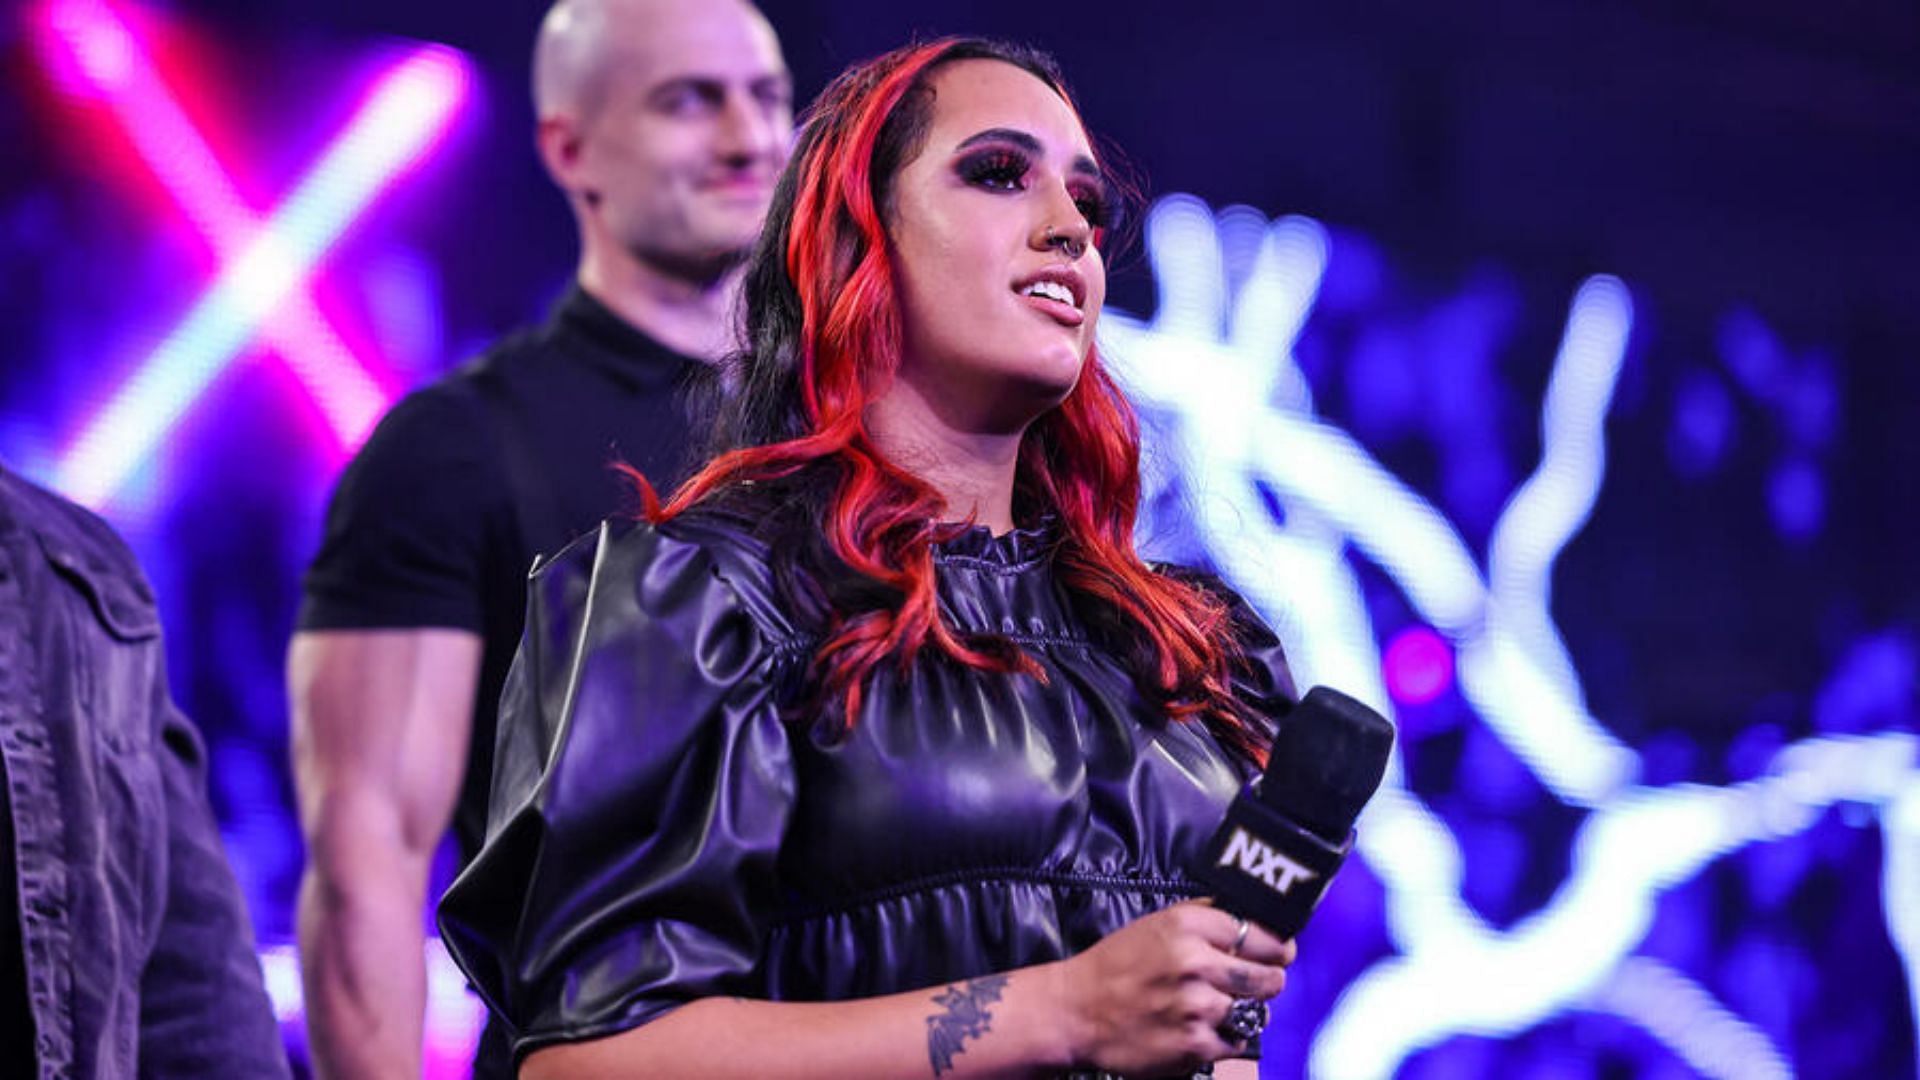 Ava is the youngest General Manager in WWE